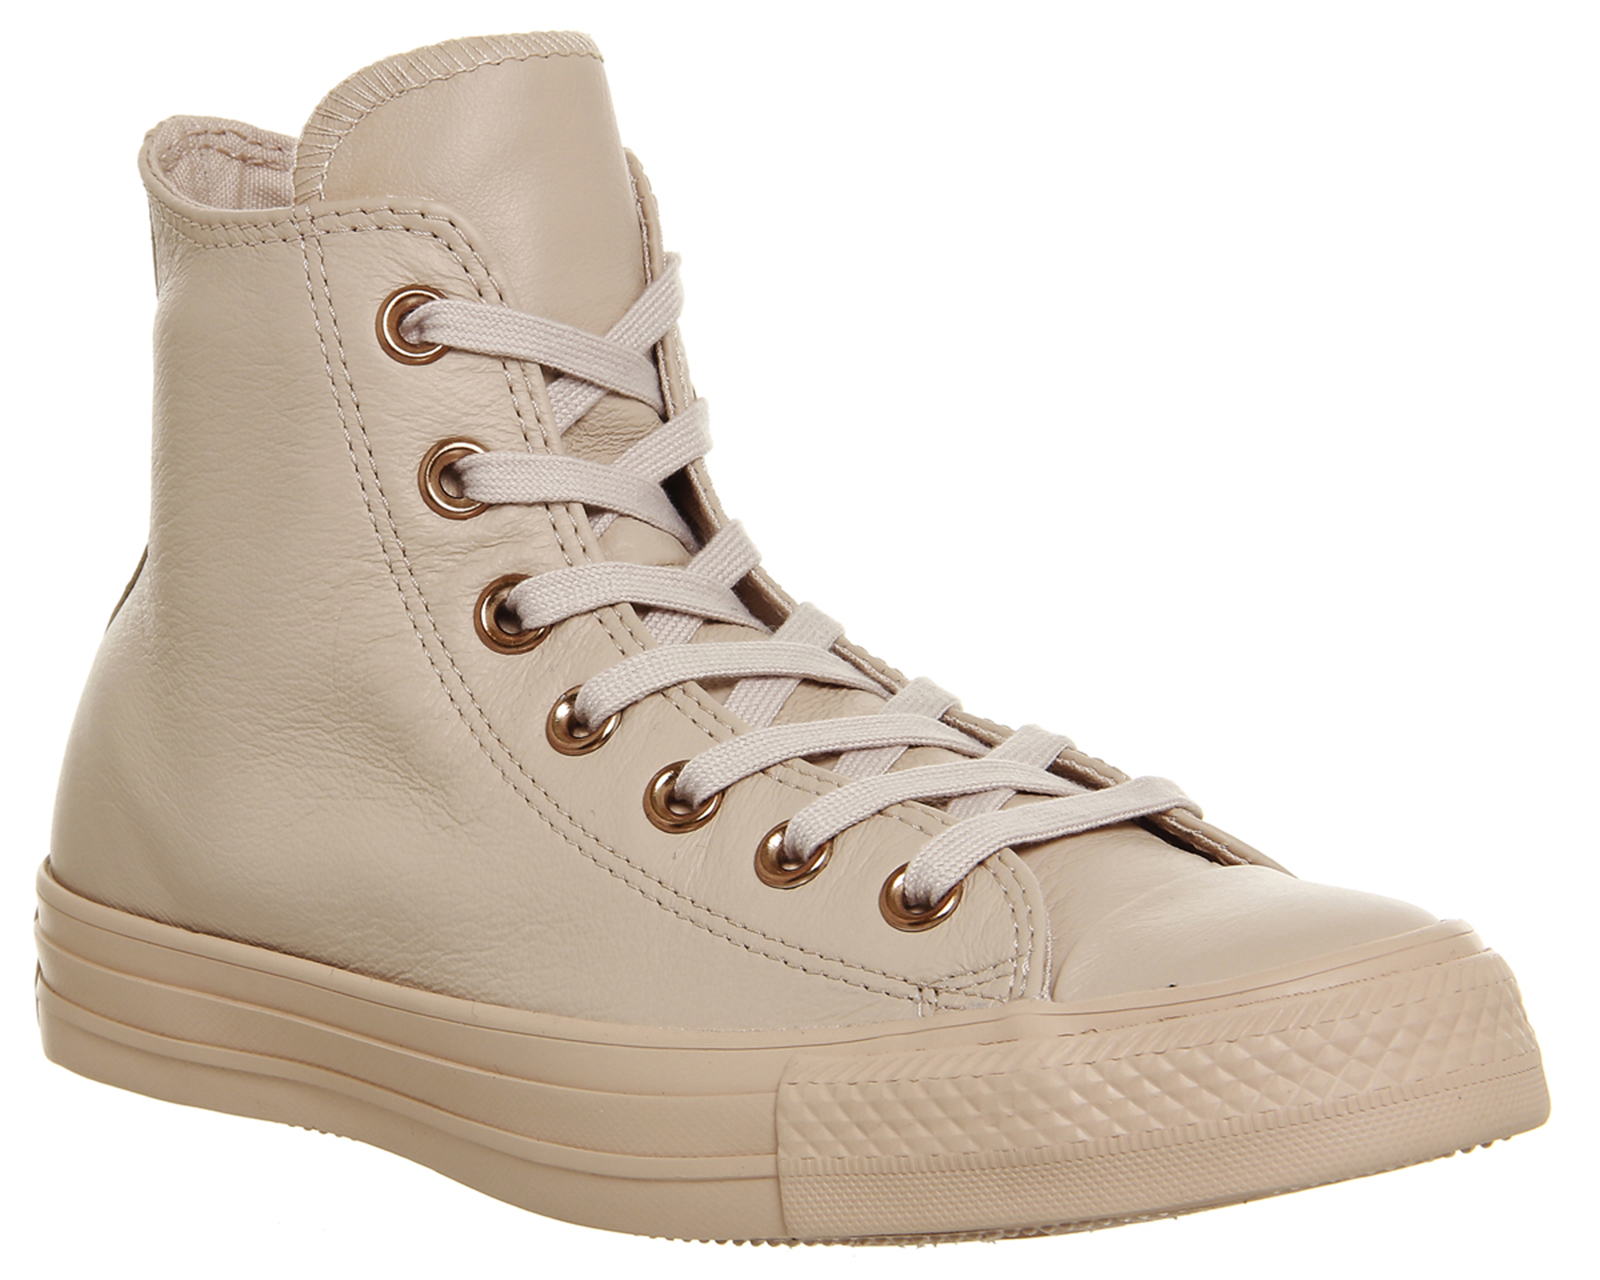 Star Hi Leather Frappe Mono - Hers trainers